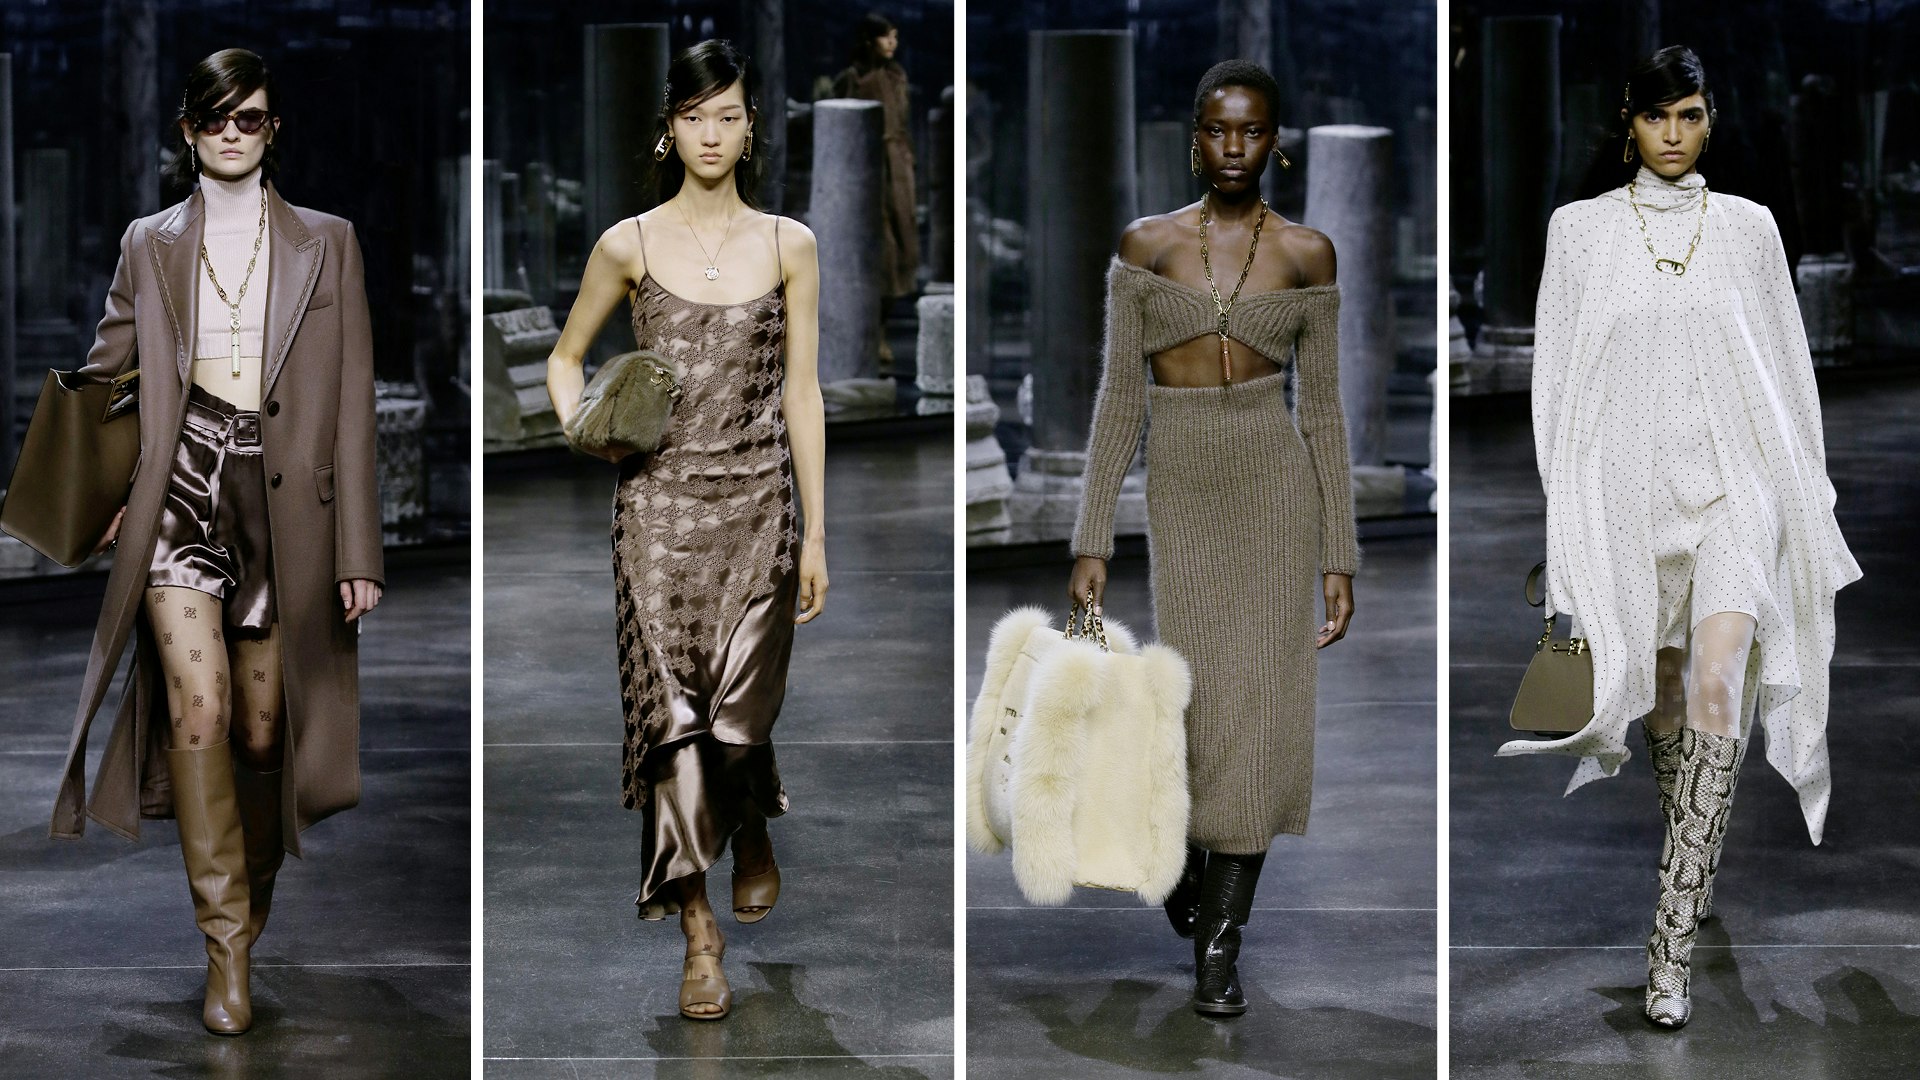 The 4 fashion trends seen at the Etro Fall-Winter 2021-2022 show